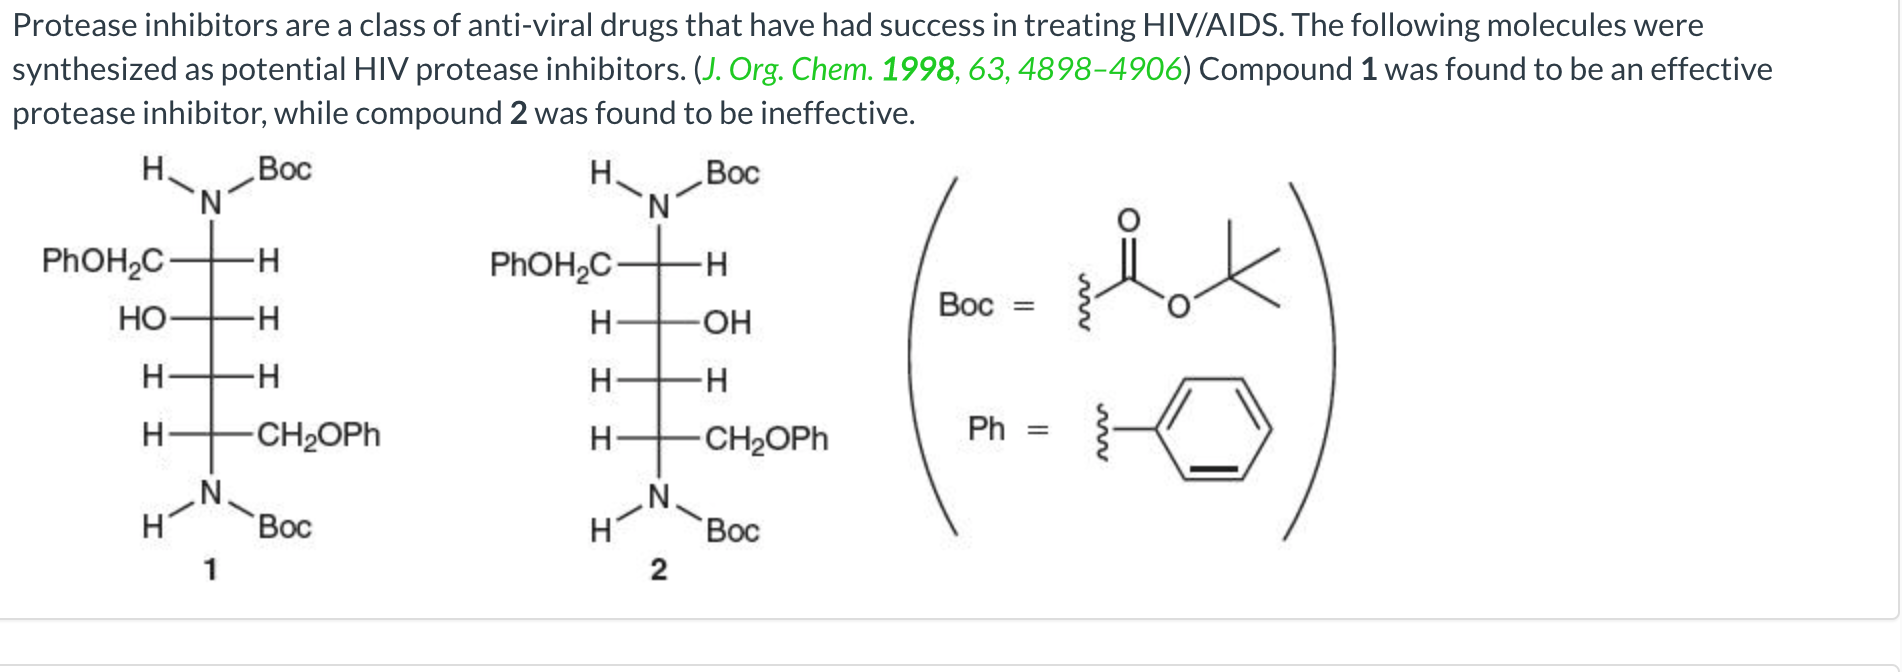 Solved Protease inhibitors are a class of anti-viral drugs | Chegg.com